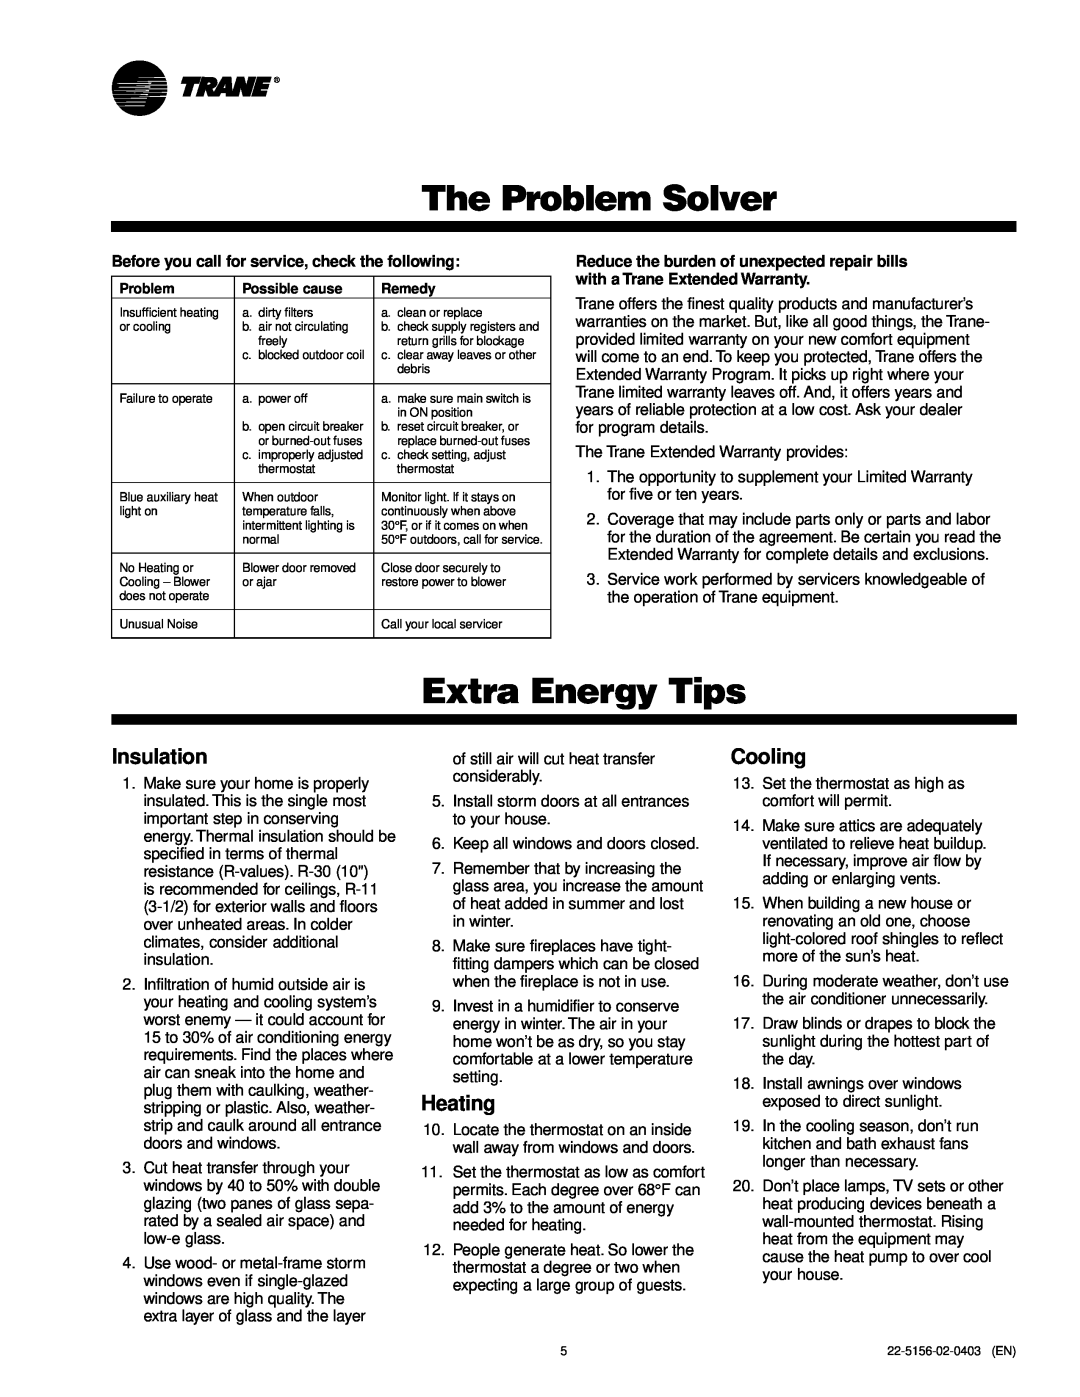 Trane XL Series manual The Problem Solver, Extra Energy Tips, Insulation, Heating, Cooling 